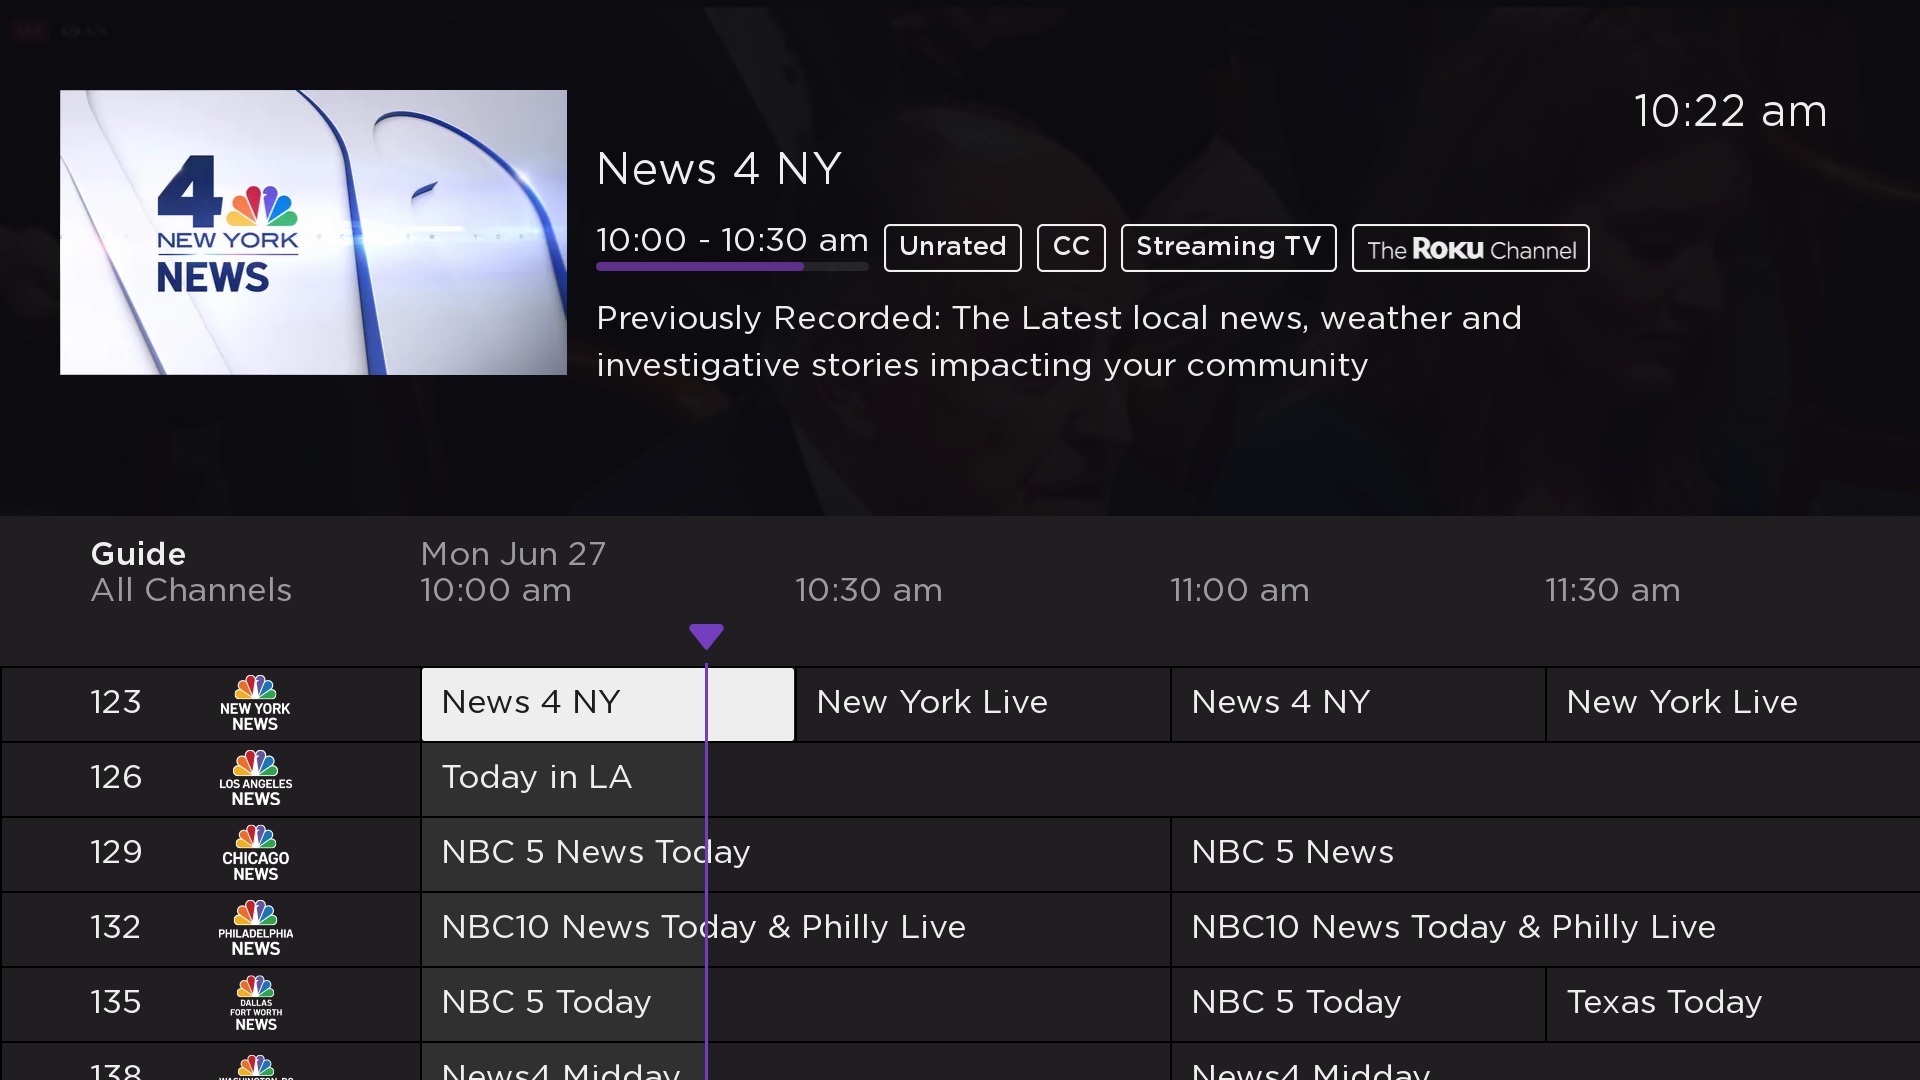 The Roku Channel Adds Free Local News Programming with NBCUniversal